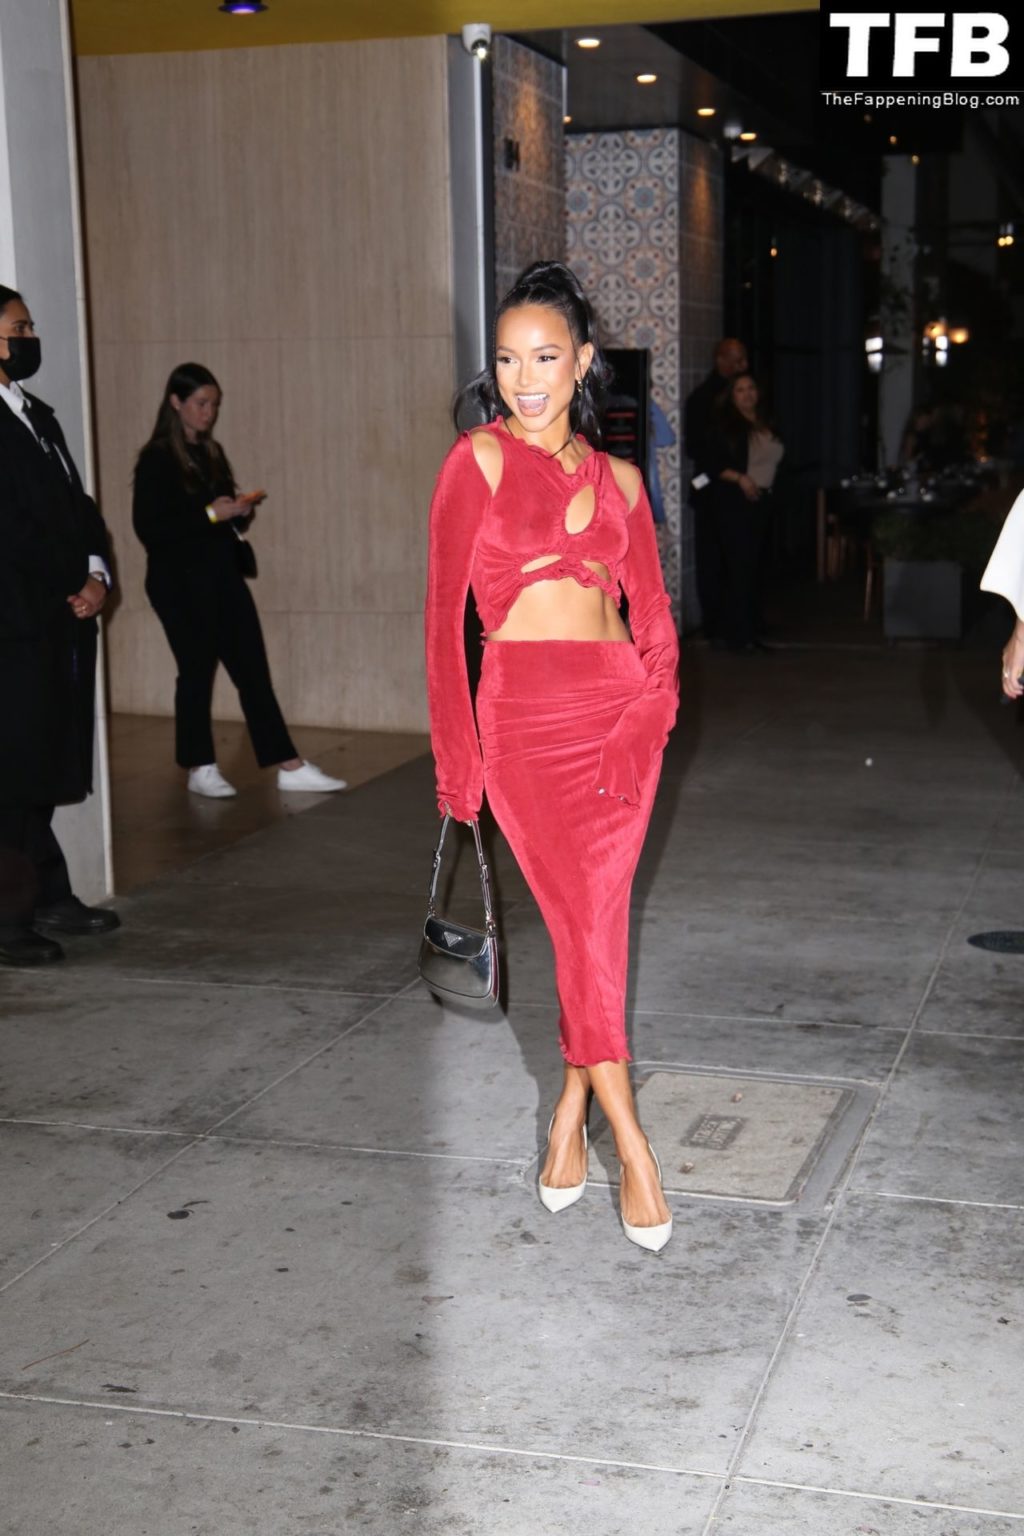 Karrueche Tran Sexy The Fappening Blog 32 1024x1536 - Karrueche Tran Shows Her Pokies in a Red Dress at The Hollywood Reporter’s Oscar Nominees Night (68 Photos)